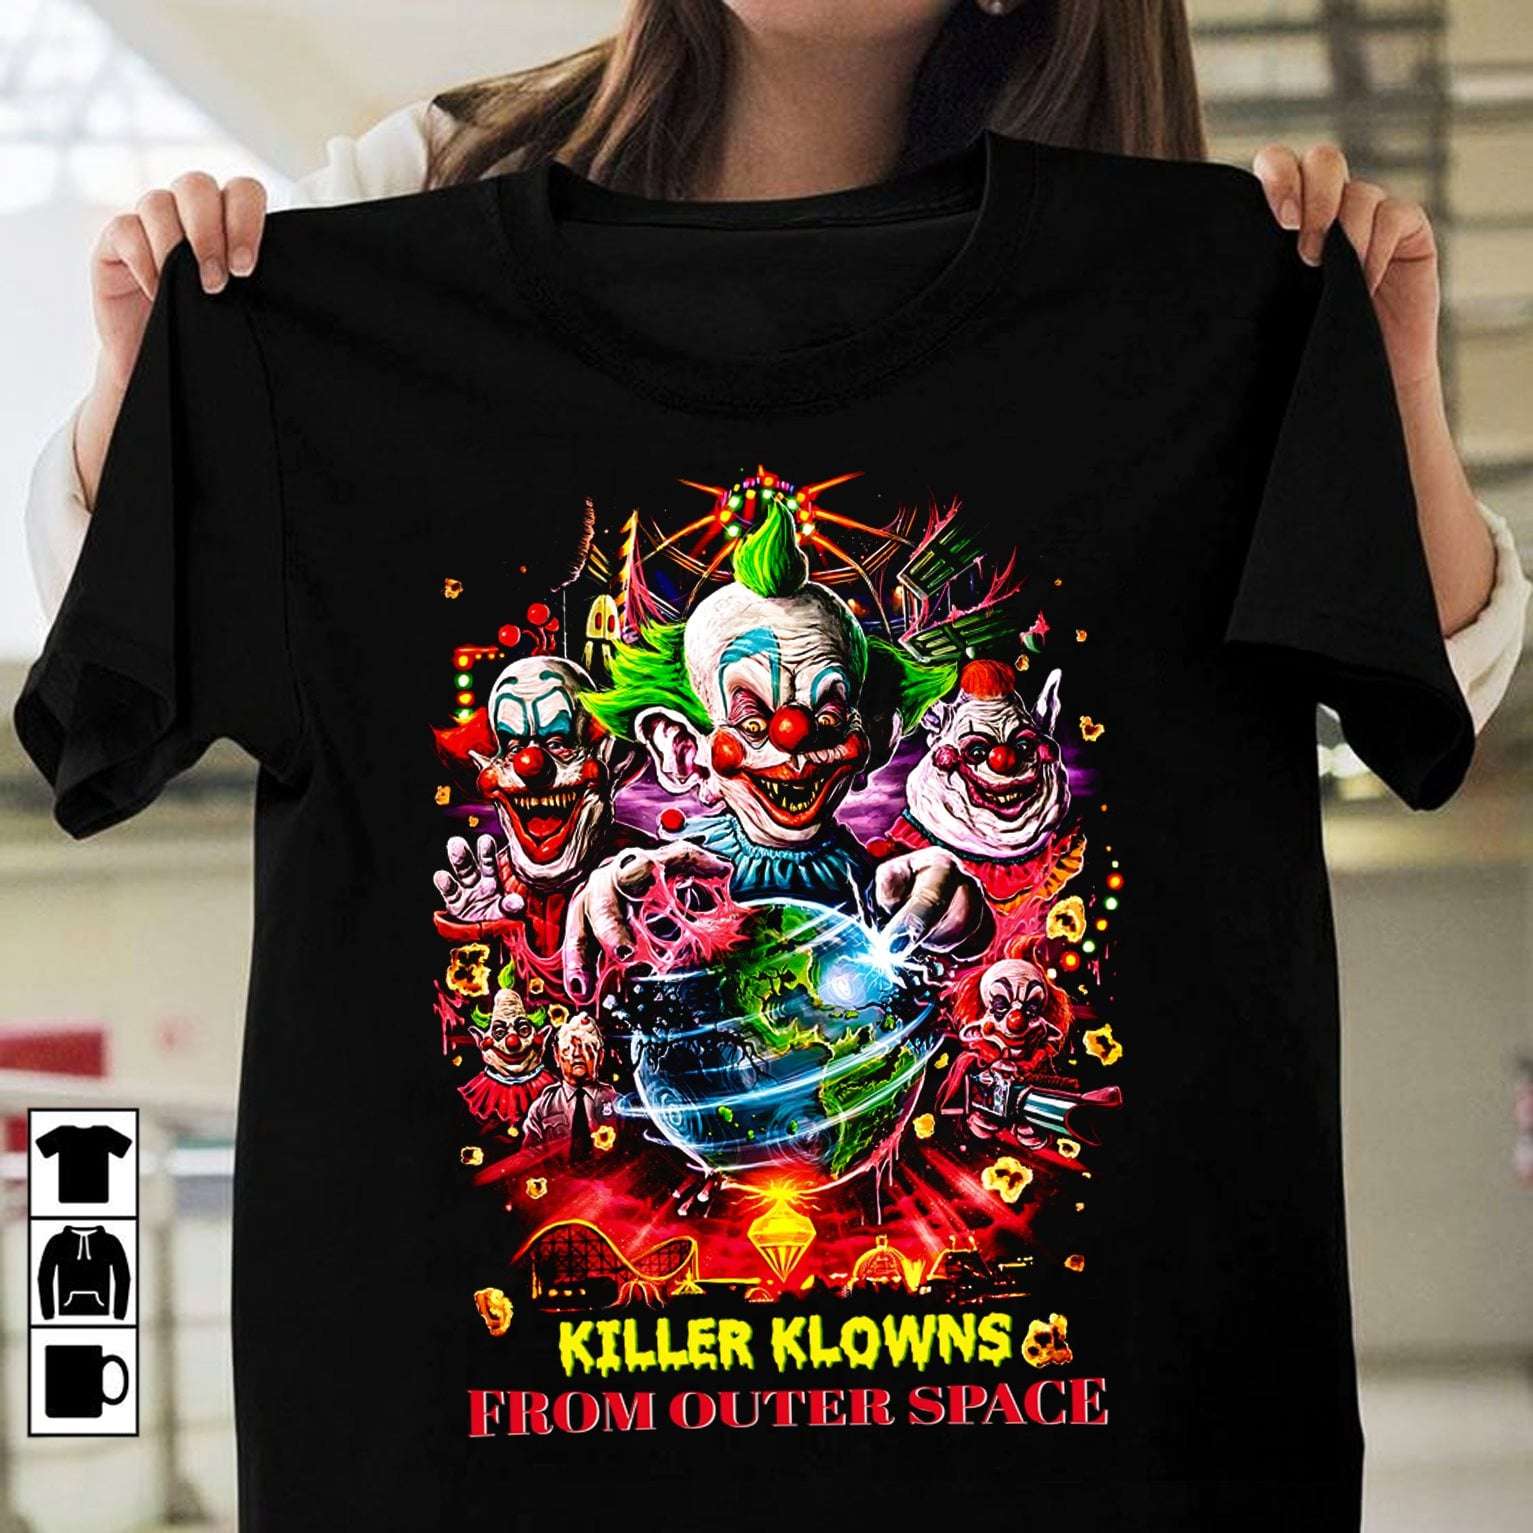 Killer Klowns from outer space - Halloween scary clownz